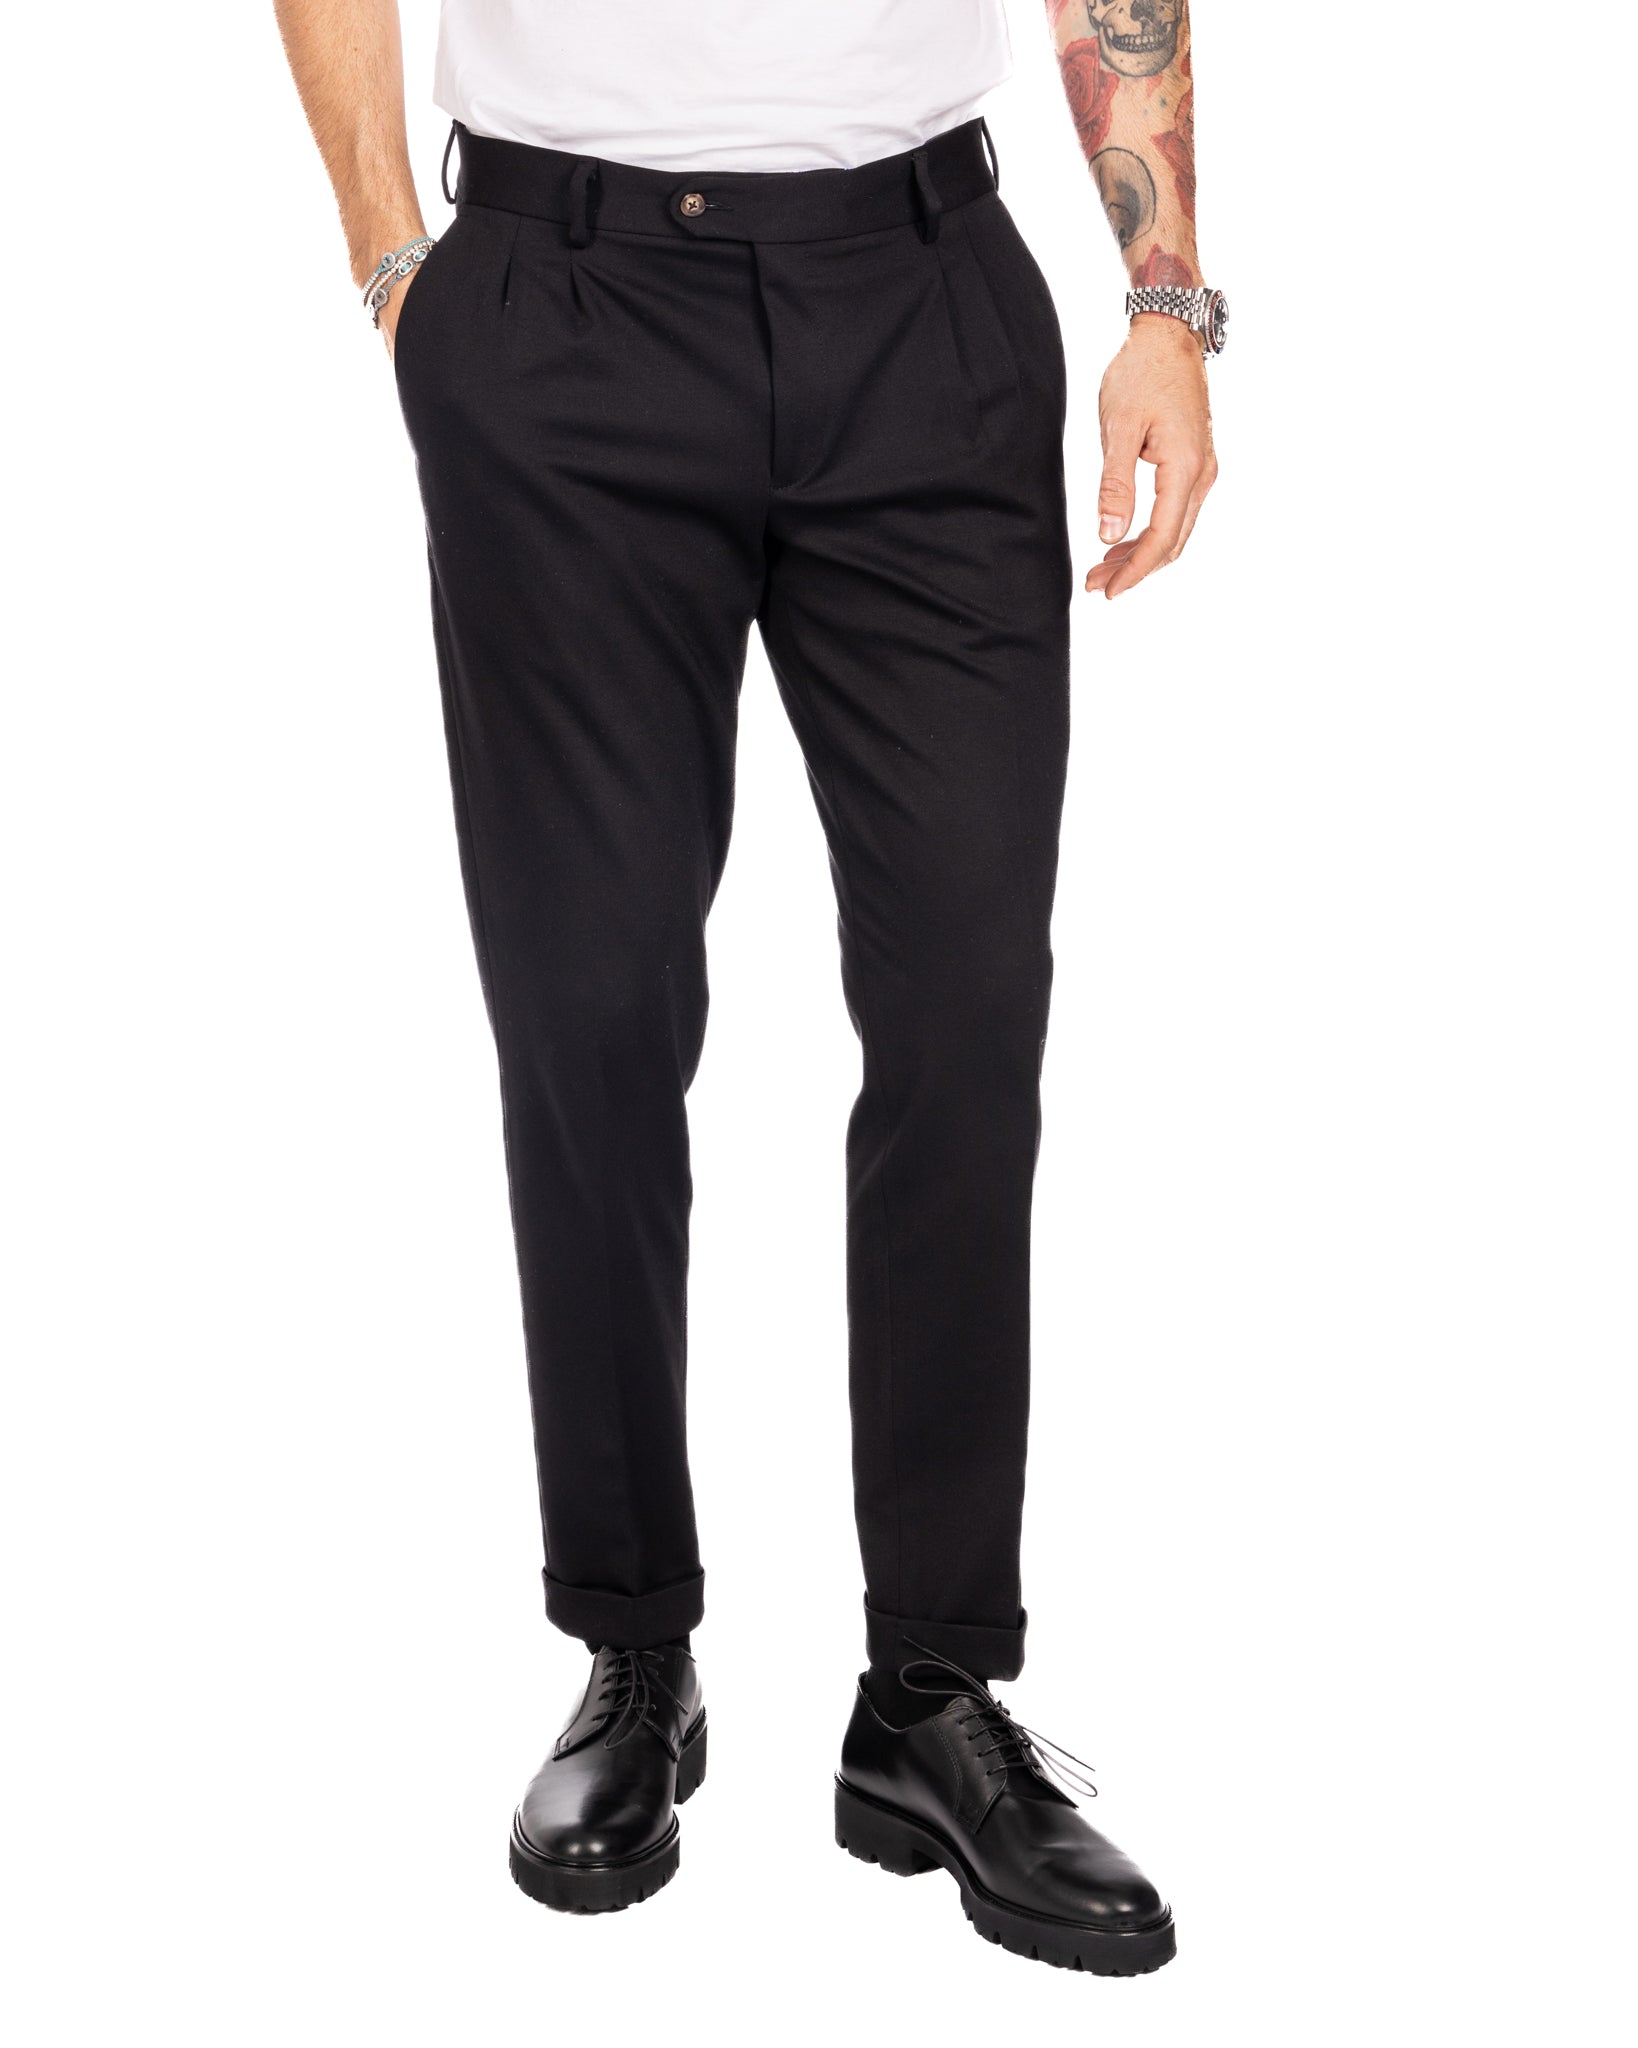 Thomas - black two-pleat trousers in milano stitch